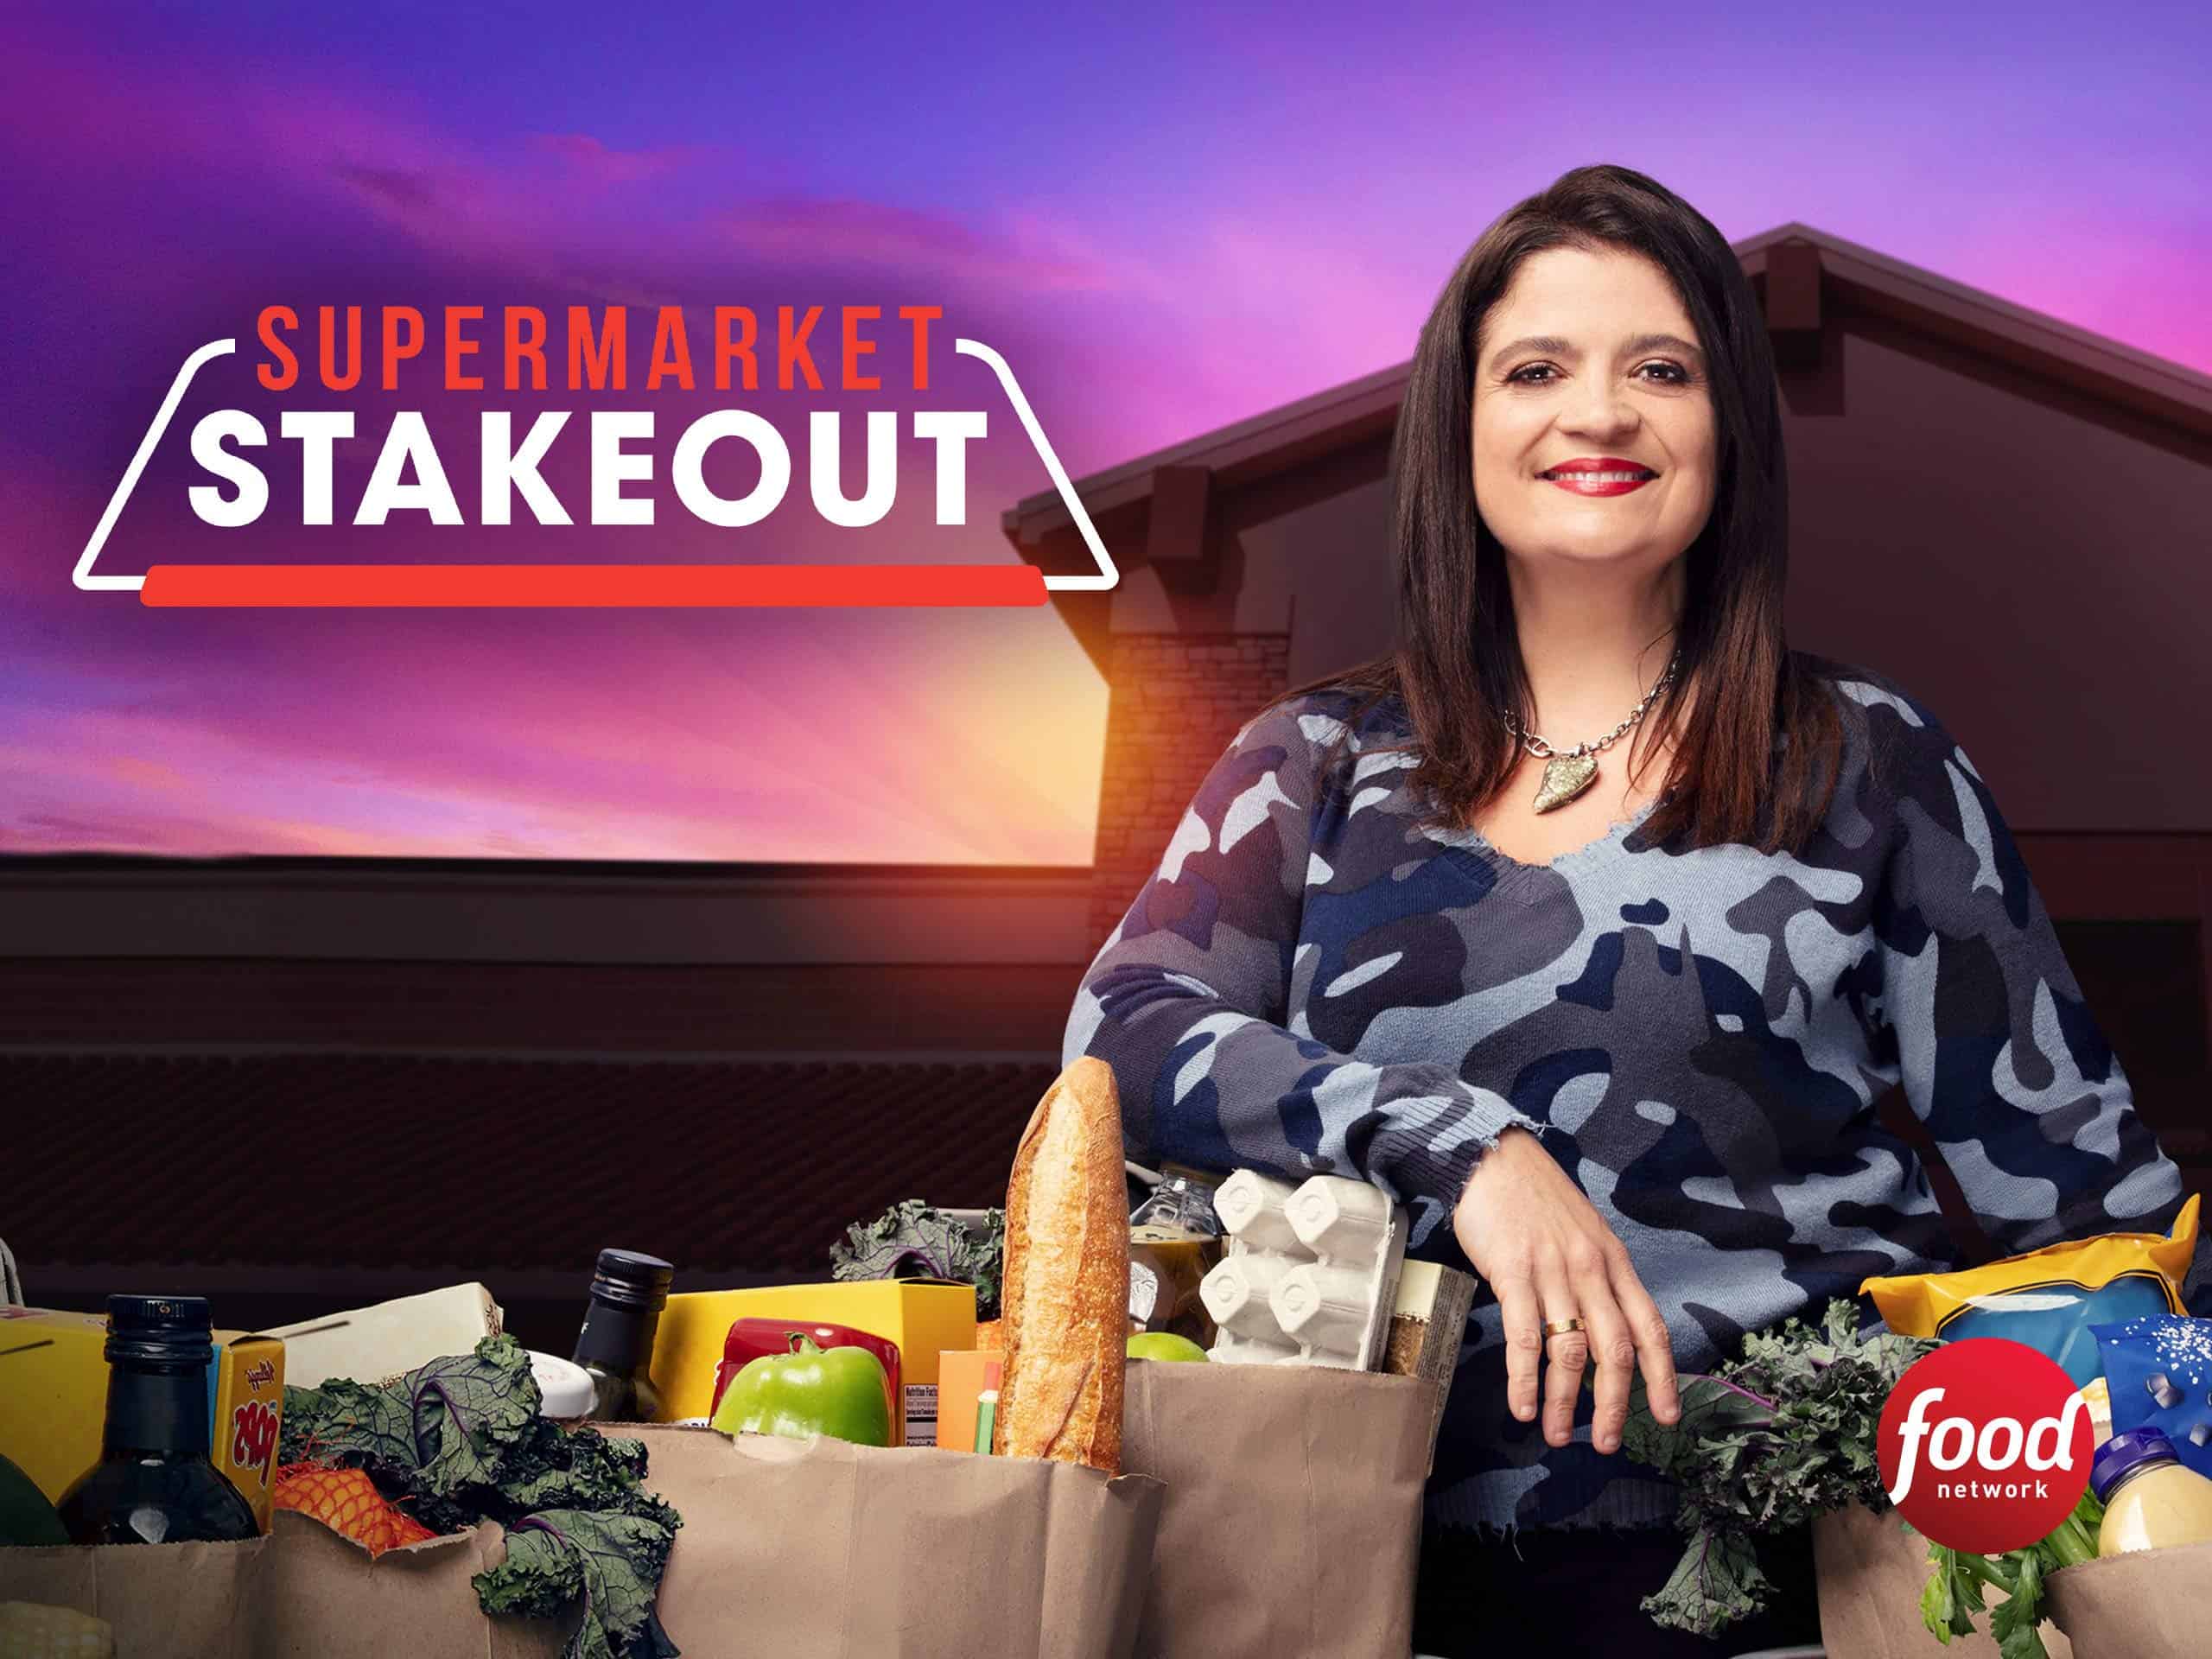 Supermarket Stakeout, a Food Network show, hosted by Alex Guarnaschelli.